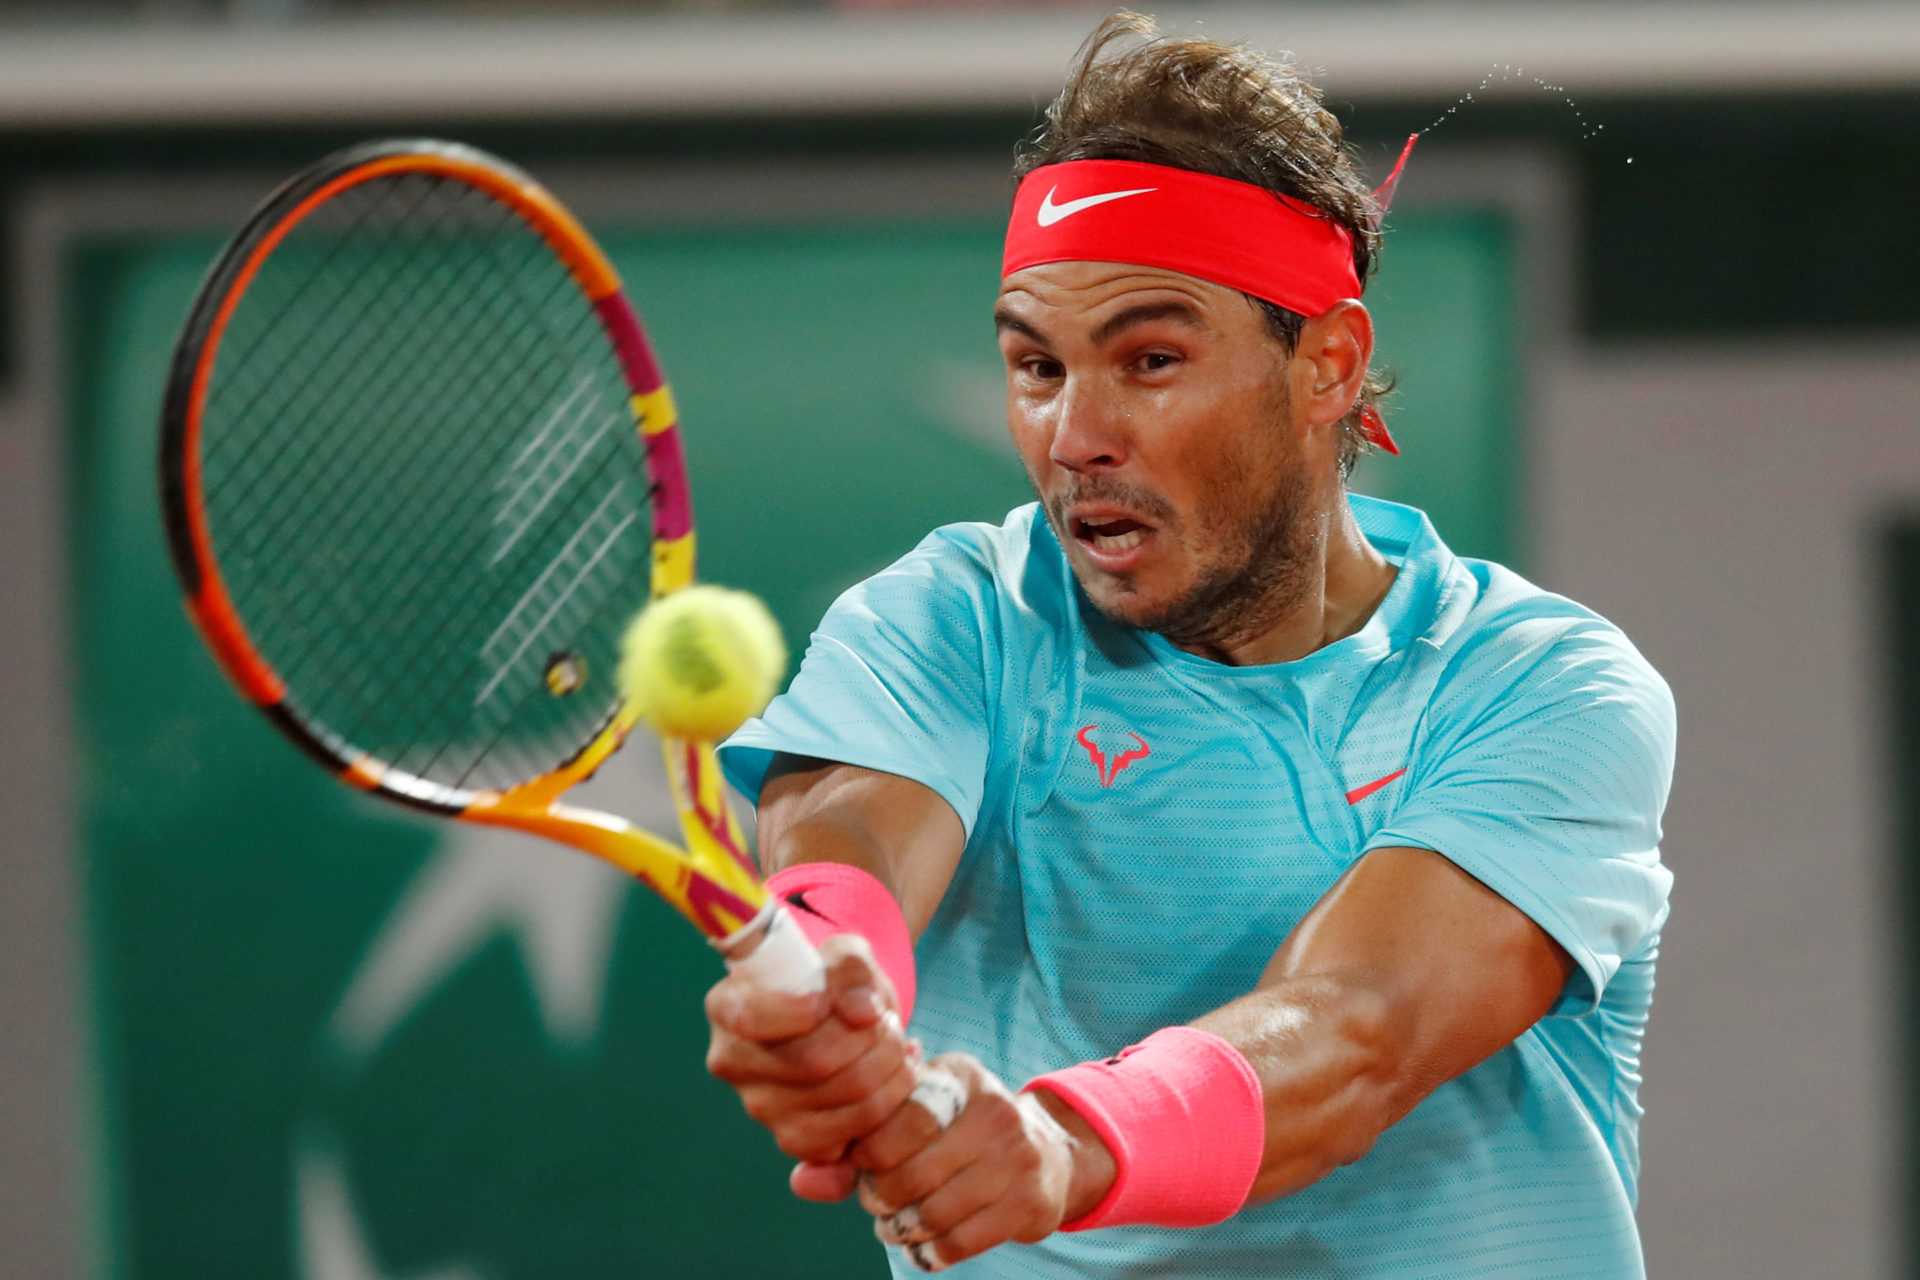 Rafael Nadal plays a shot at French Open 2020